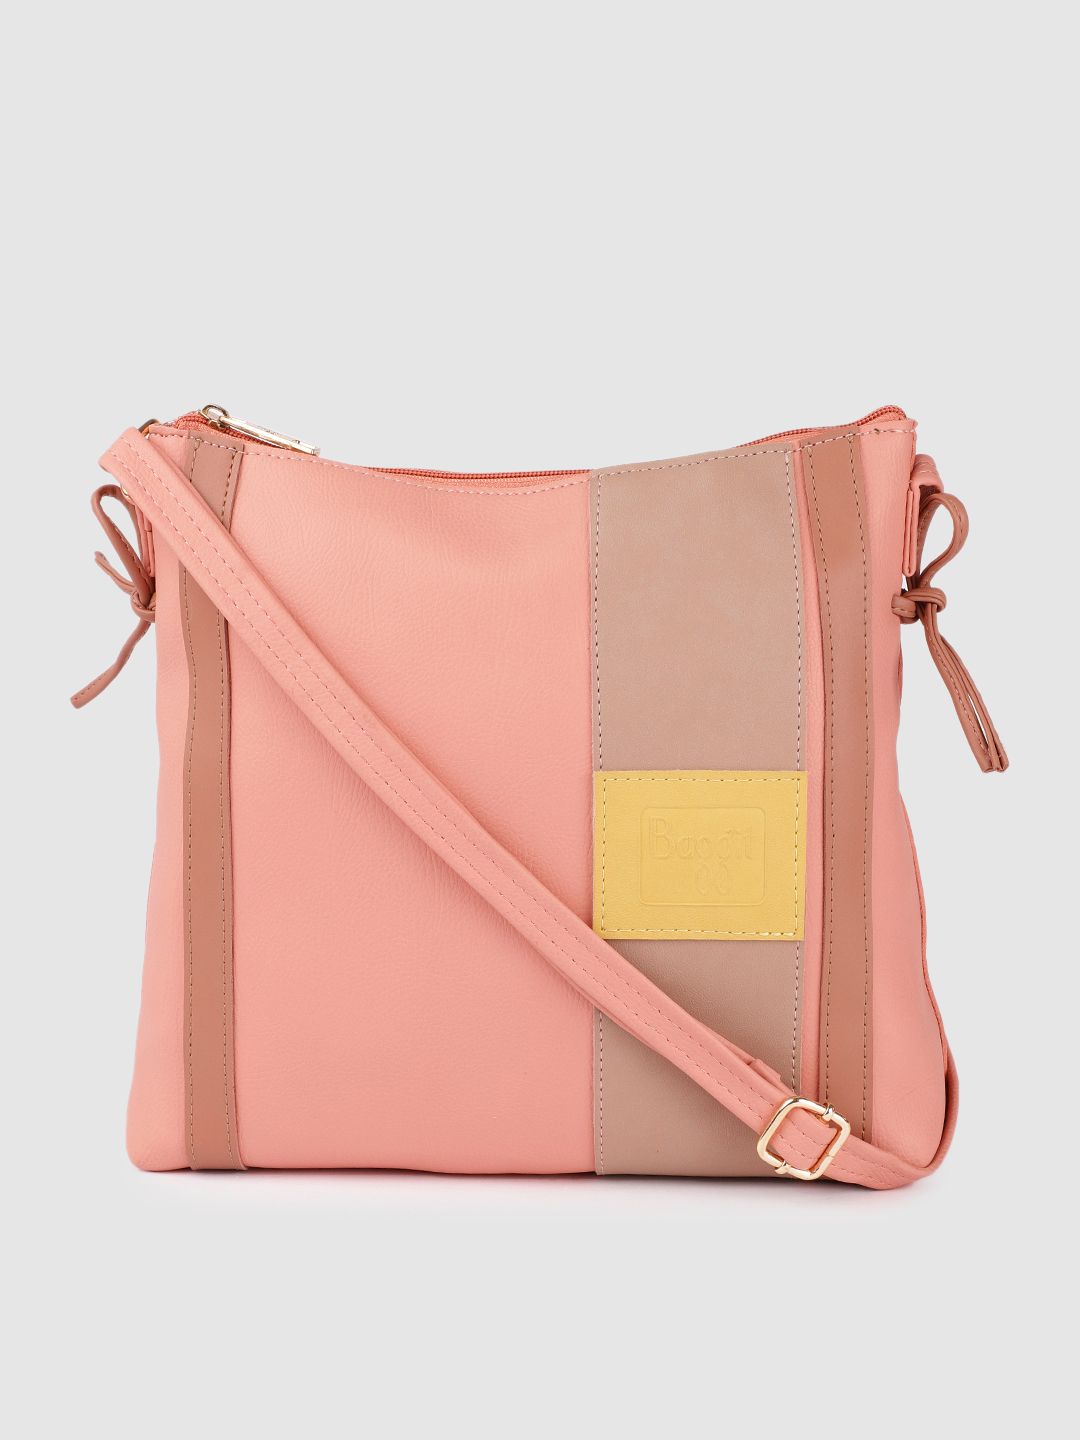 Baggit Pink Colourblocked Structured Sling Bag Price in India